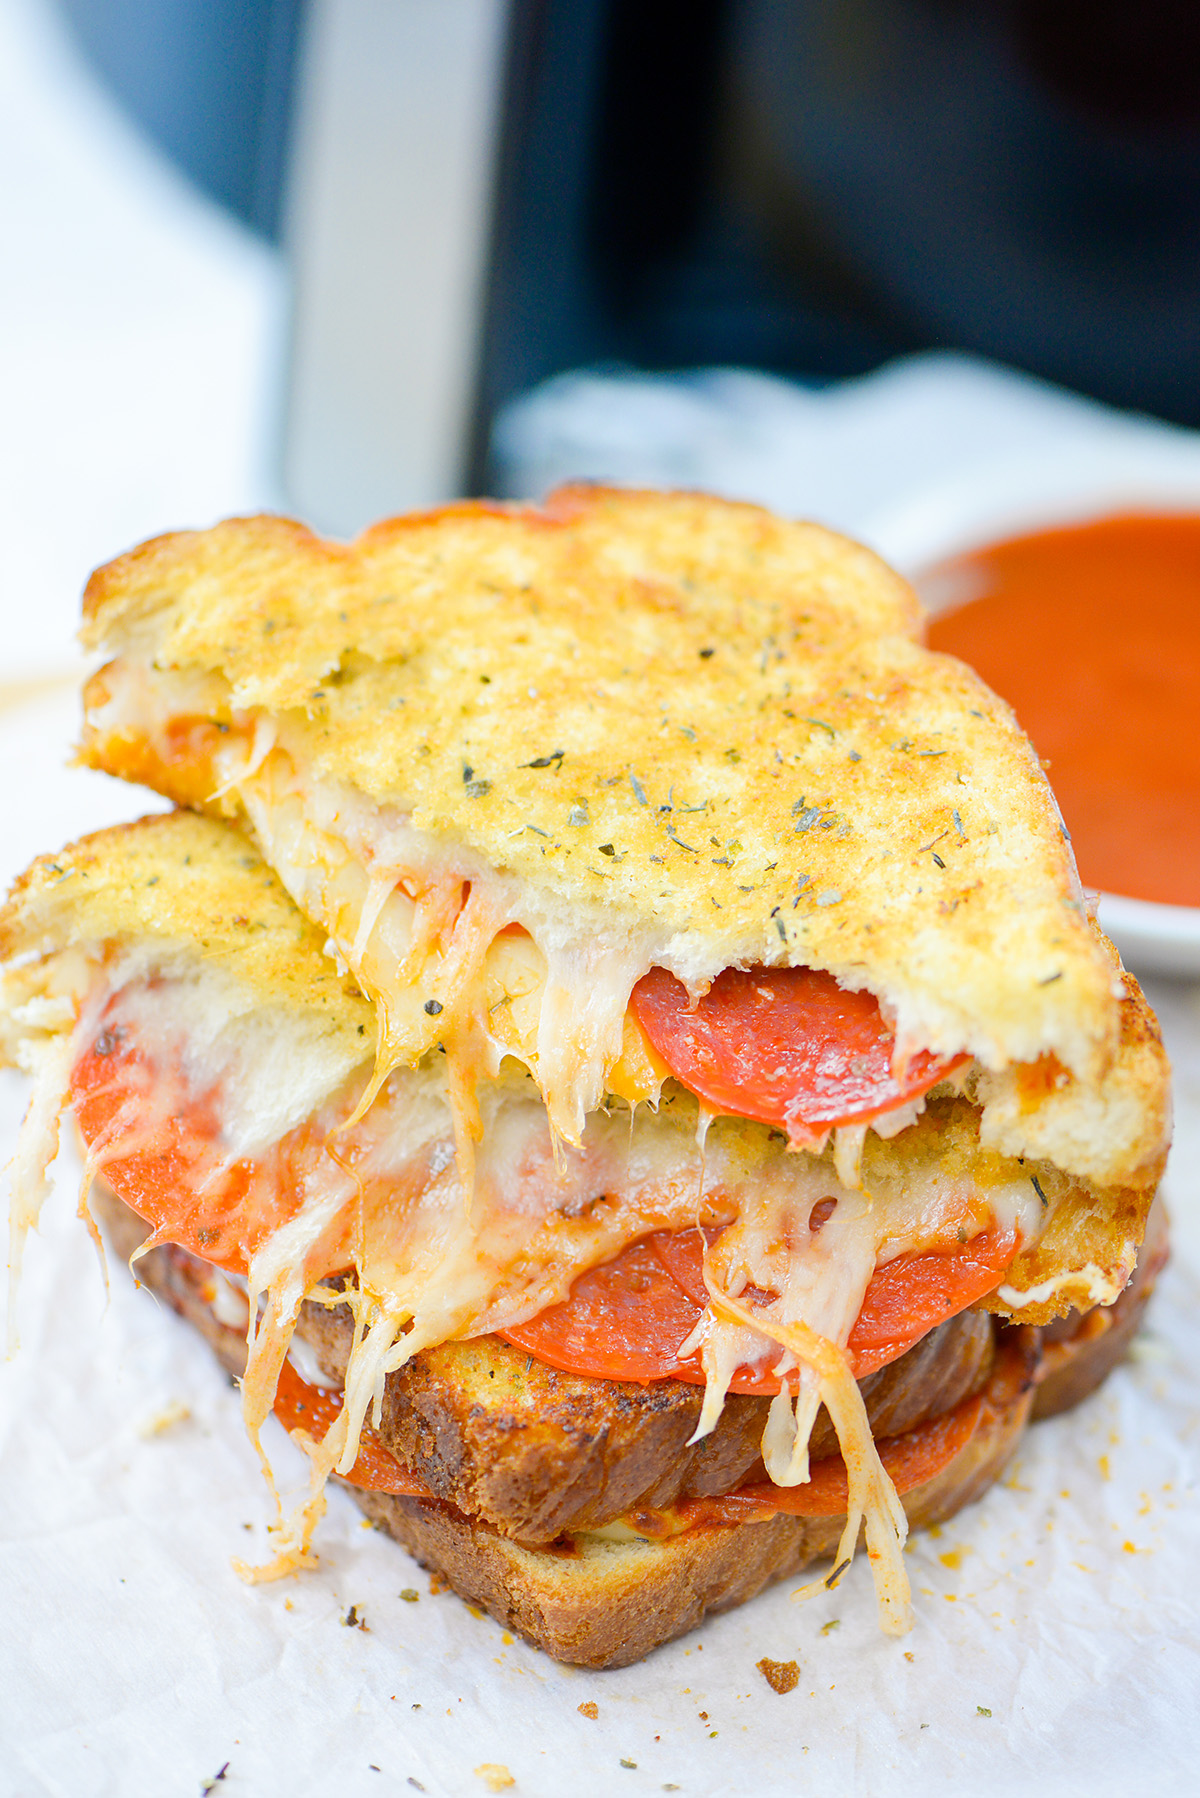 Pizza grilled cheese cut in half.